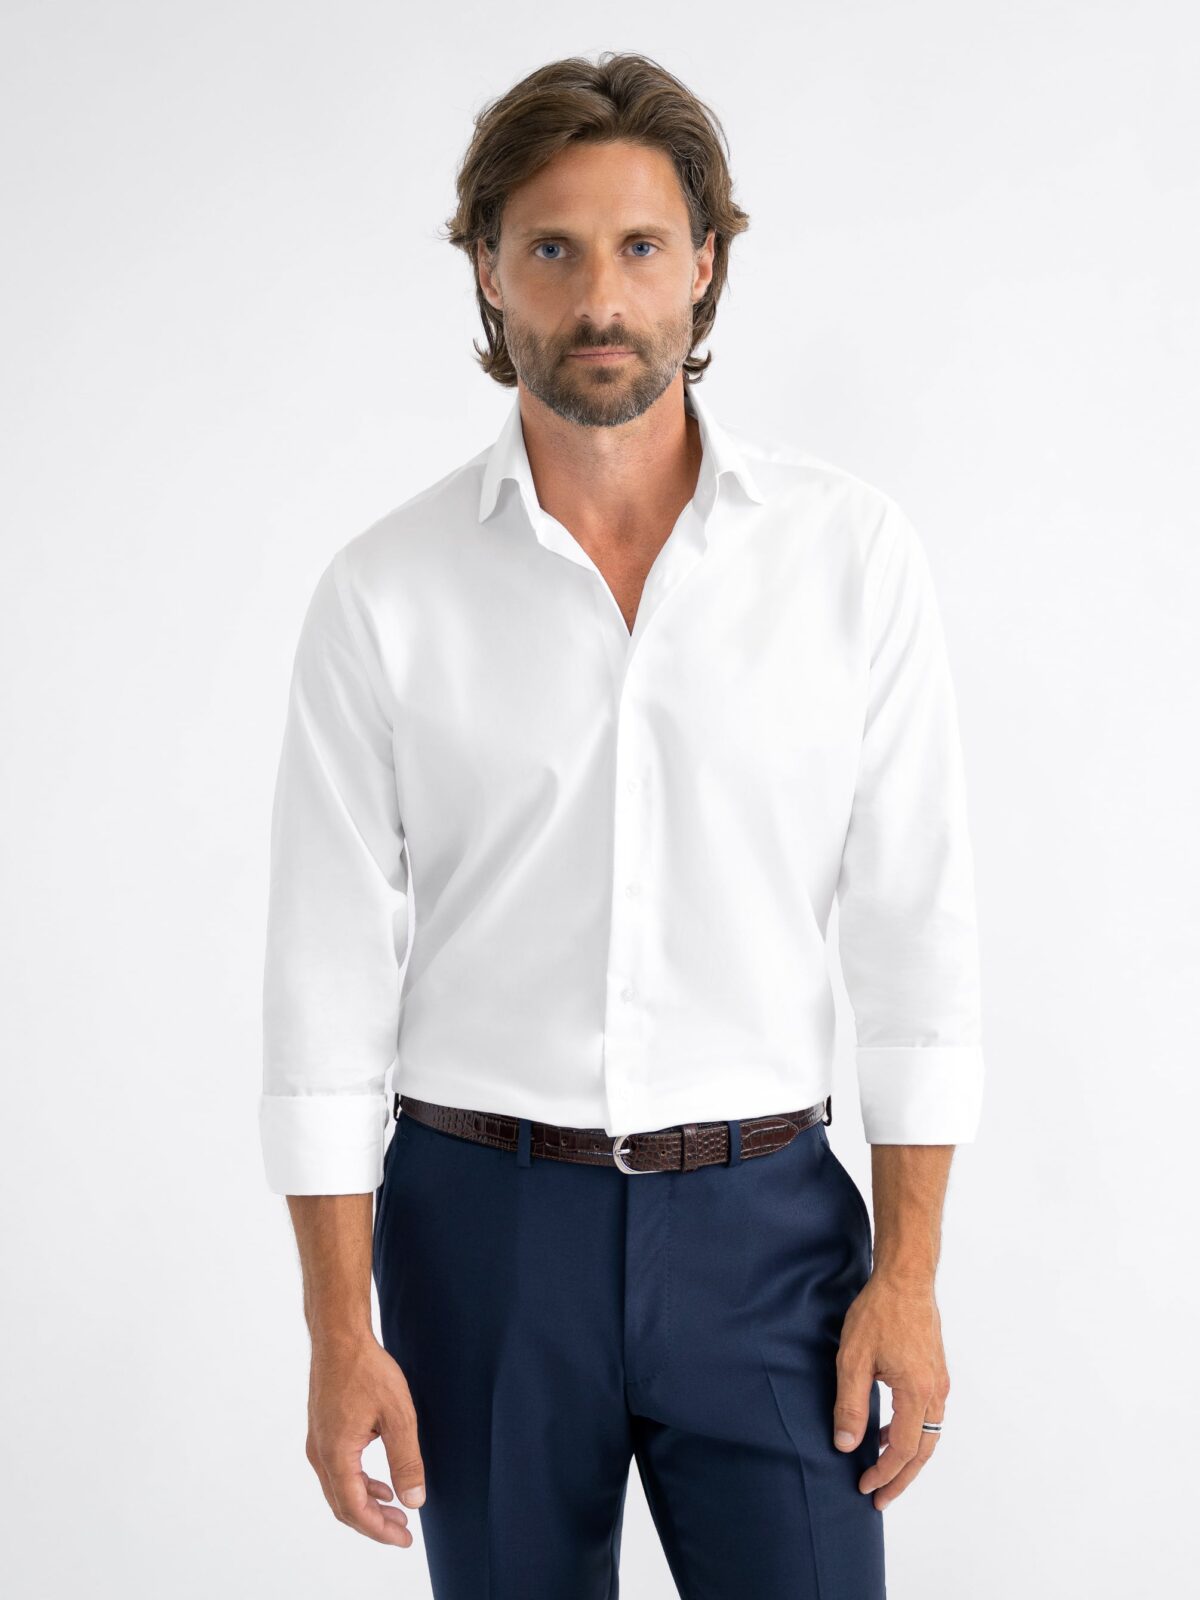 Mayfair Wrinkle-Resistant White Twill Custom Made Shirt Shirt by Proper  Cloth